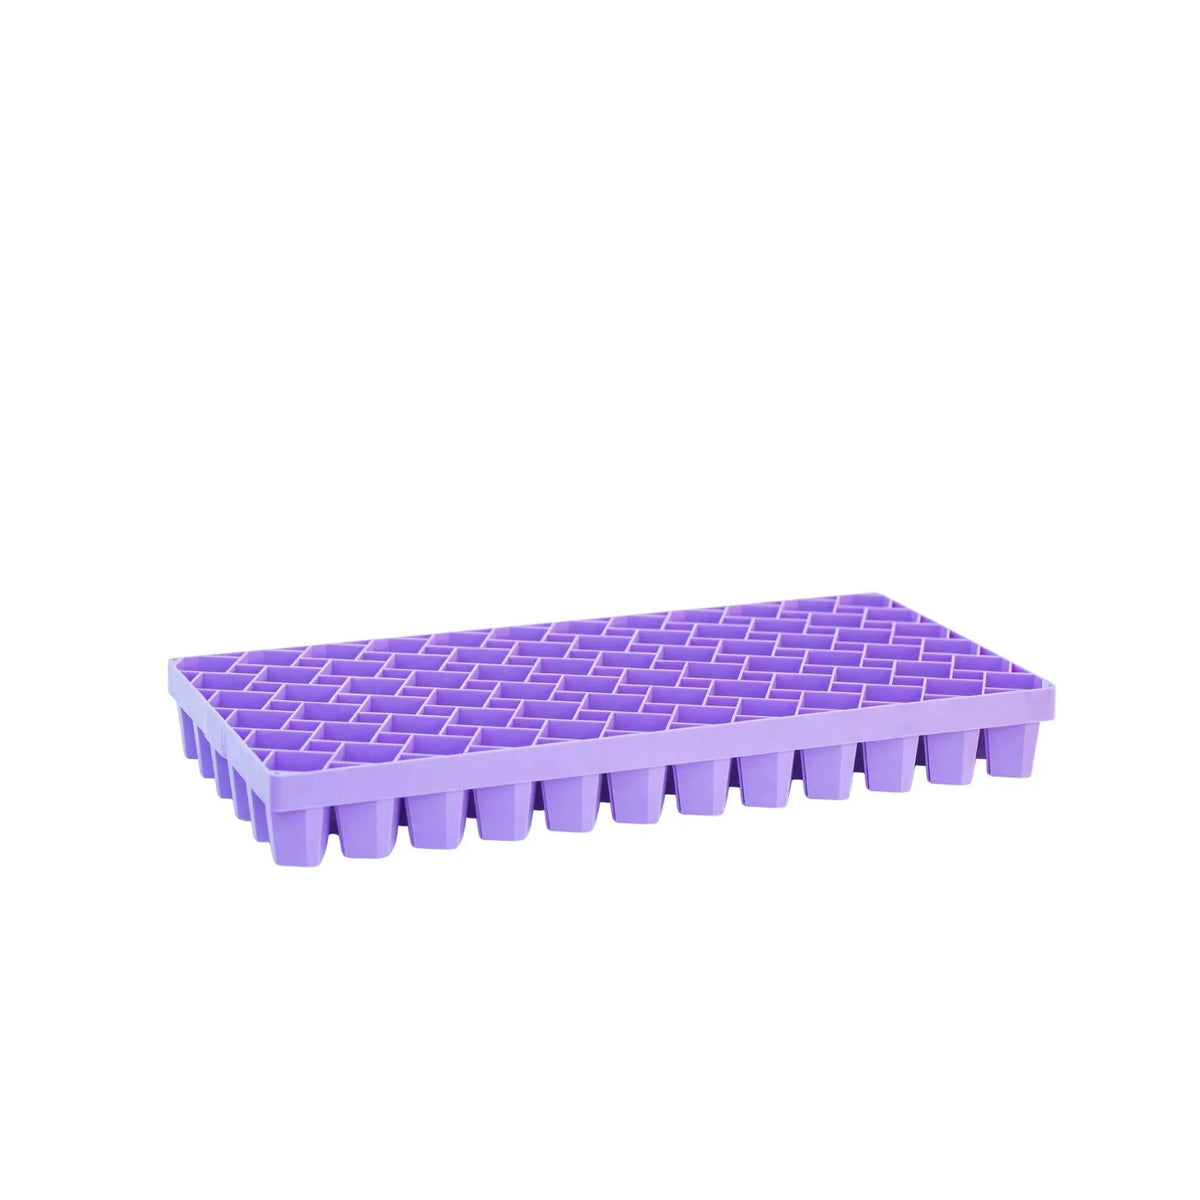 Bootstrap Farmer Air Prune Propagation Tray 72 Cell | Assorted Colors